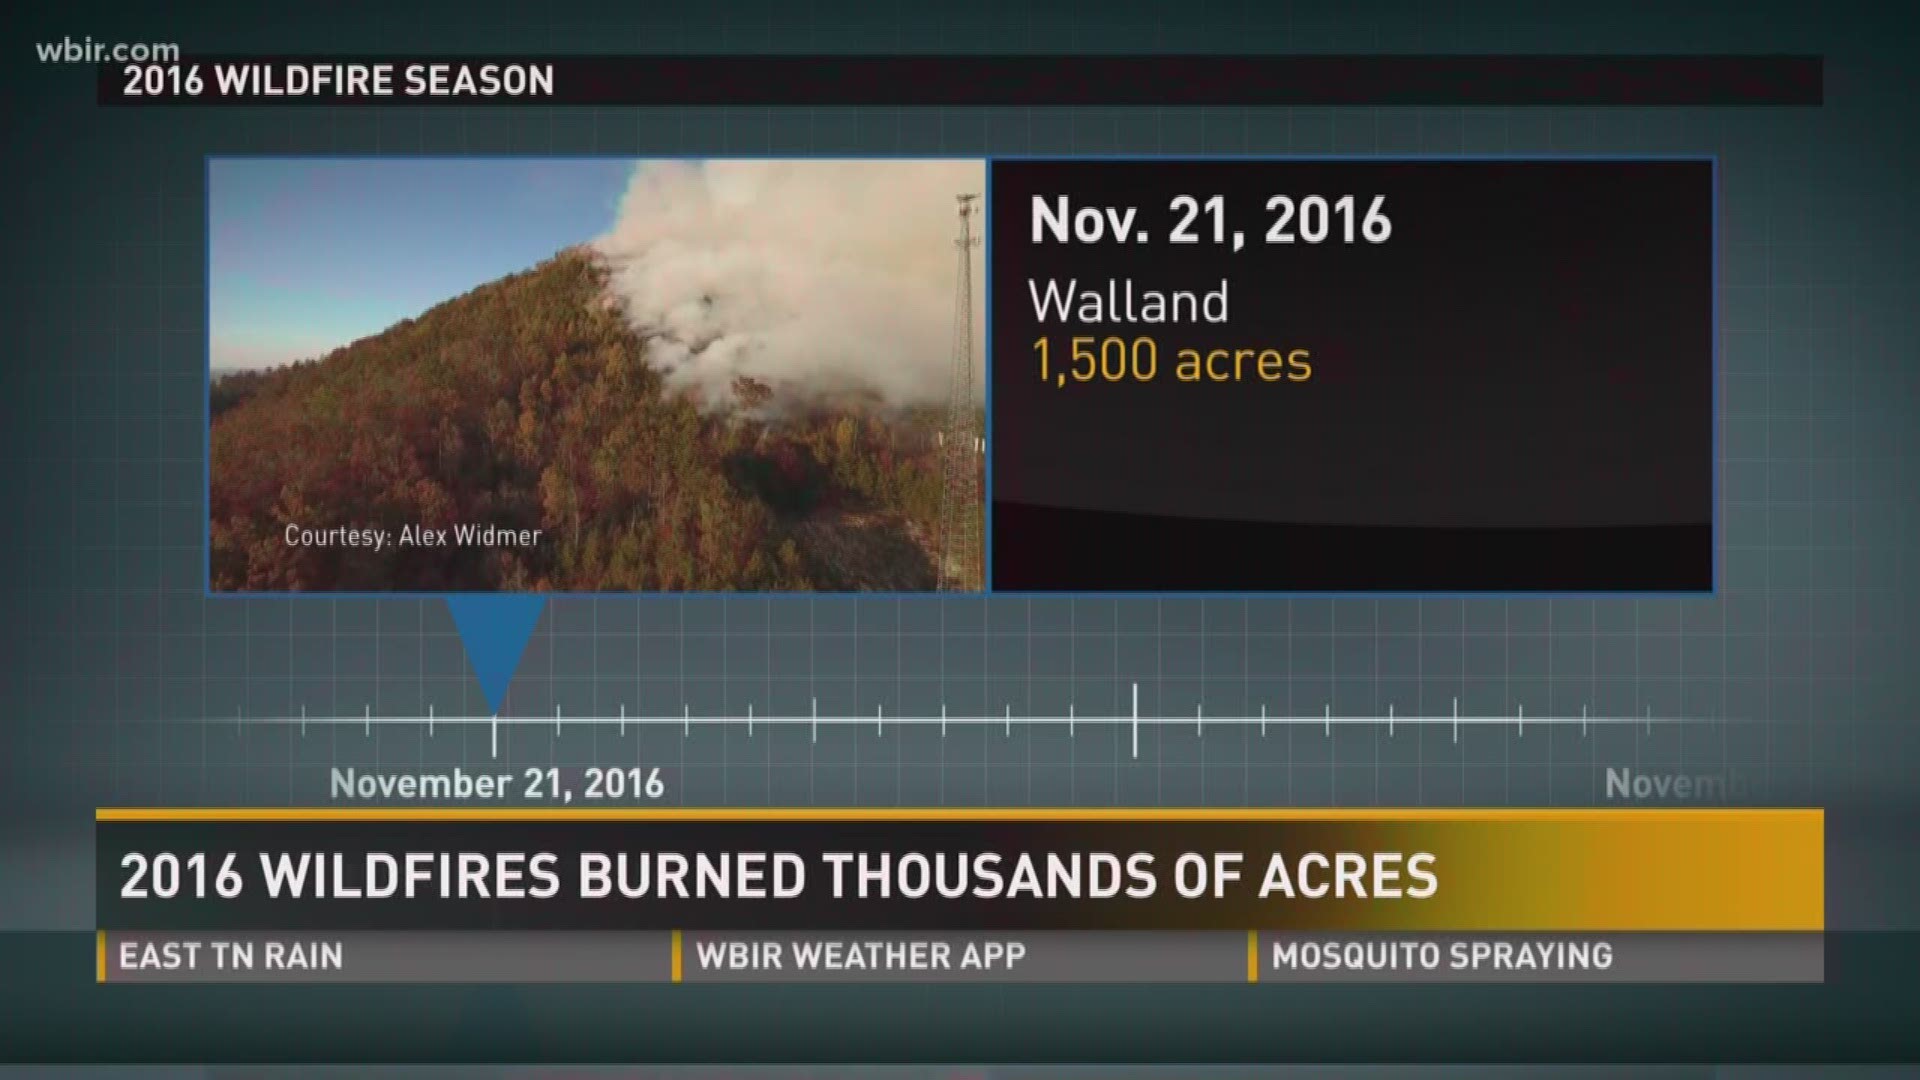 Oct. 9, 2017: A look back at the 2016 fire season, which saw hundreds of wildfires in East Tennessee.